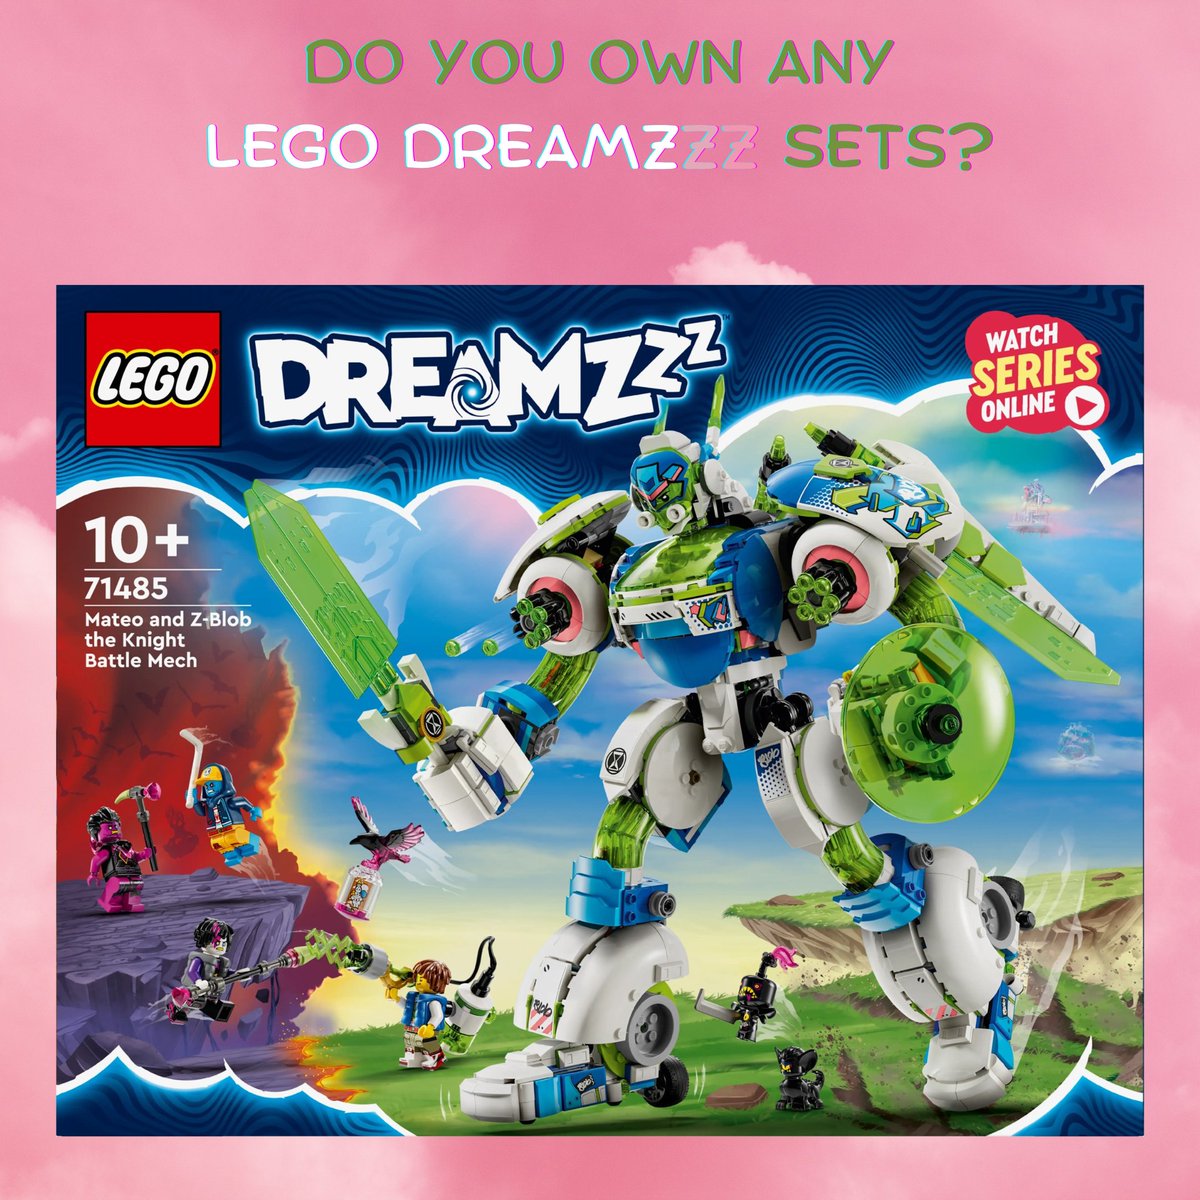 Have you picked up any #LEGODREAMZzz sets? These warped, unconventional LEGO sets are certainly quite creative and fun! #LEGO #AFOL